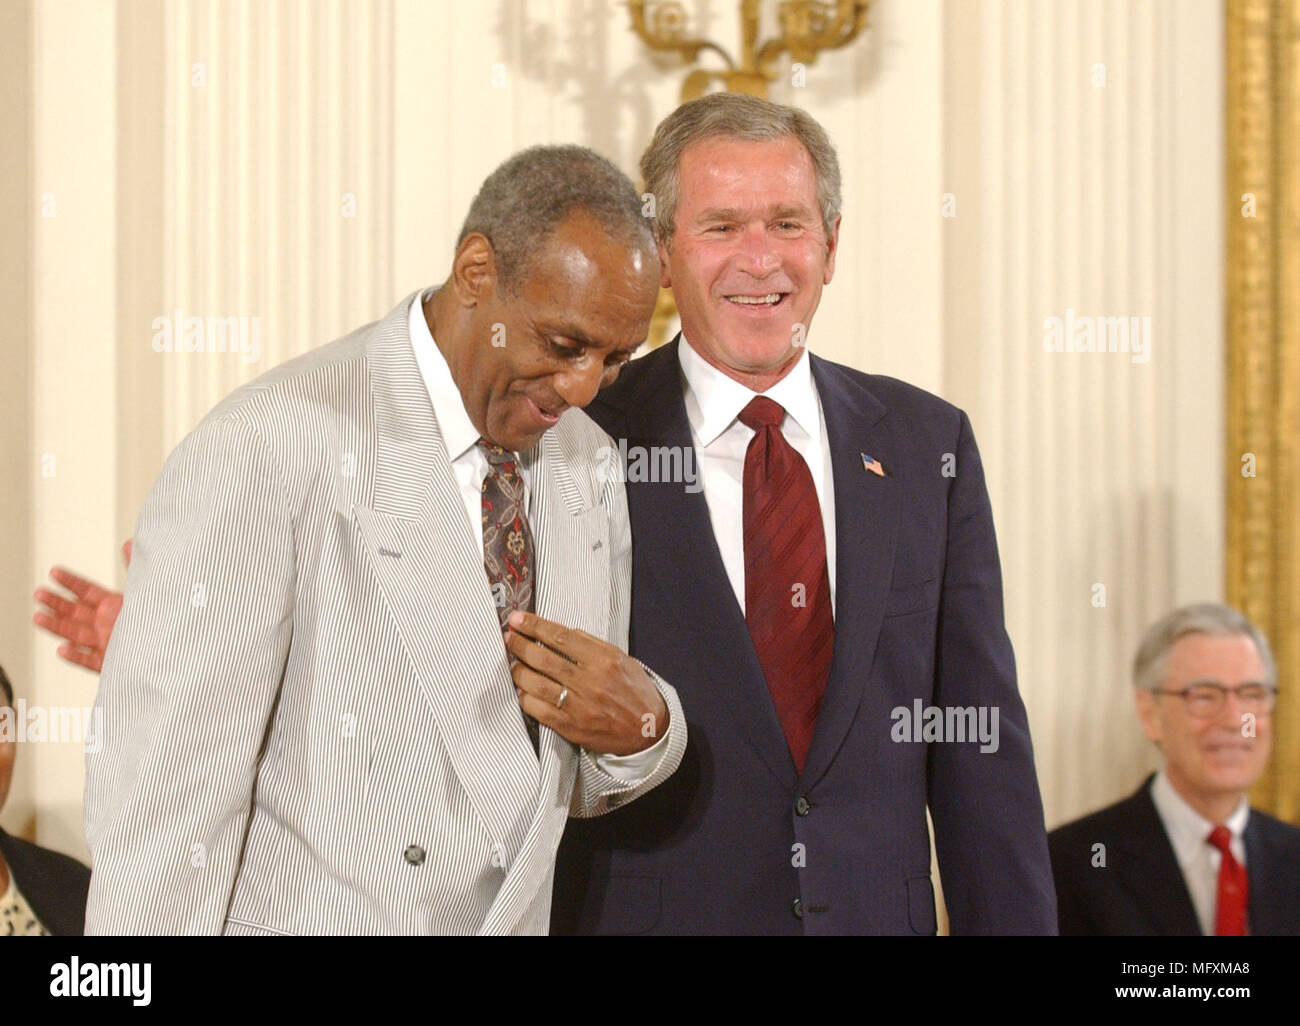 Washington, District of Columbia, USA. 9th July, 2002. Washington, DC - July 9, 2002 -- United States President George W. Bush honors Bill Cosby with the Presidential Medal of Freedom during a ceremony in the East Room of the White House in Washington, DC on July 9, 2002.Credit: Ron Sachs/CNP Credit: Ron Sachs/CNP/ZUMA Wire/Alamy Live News Stock Photo